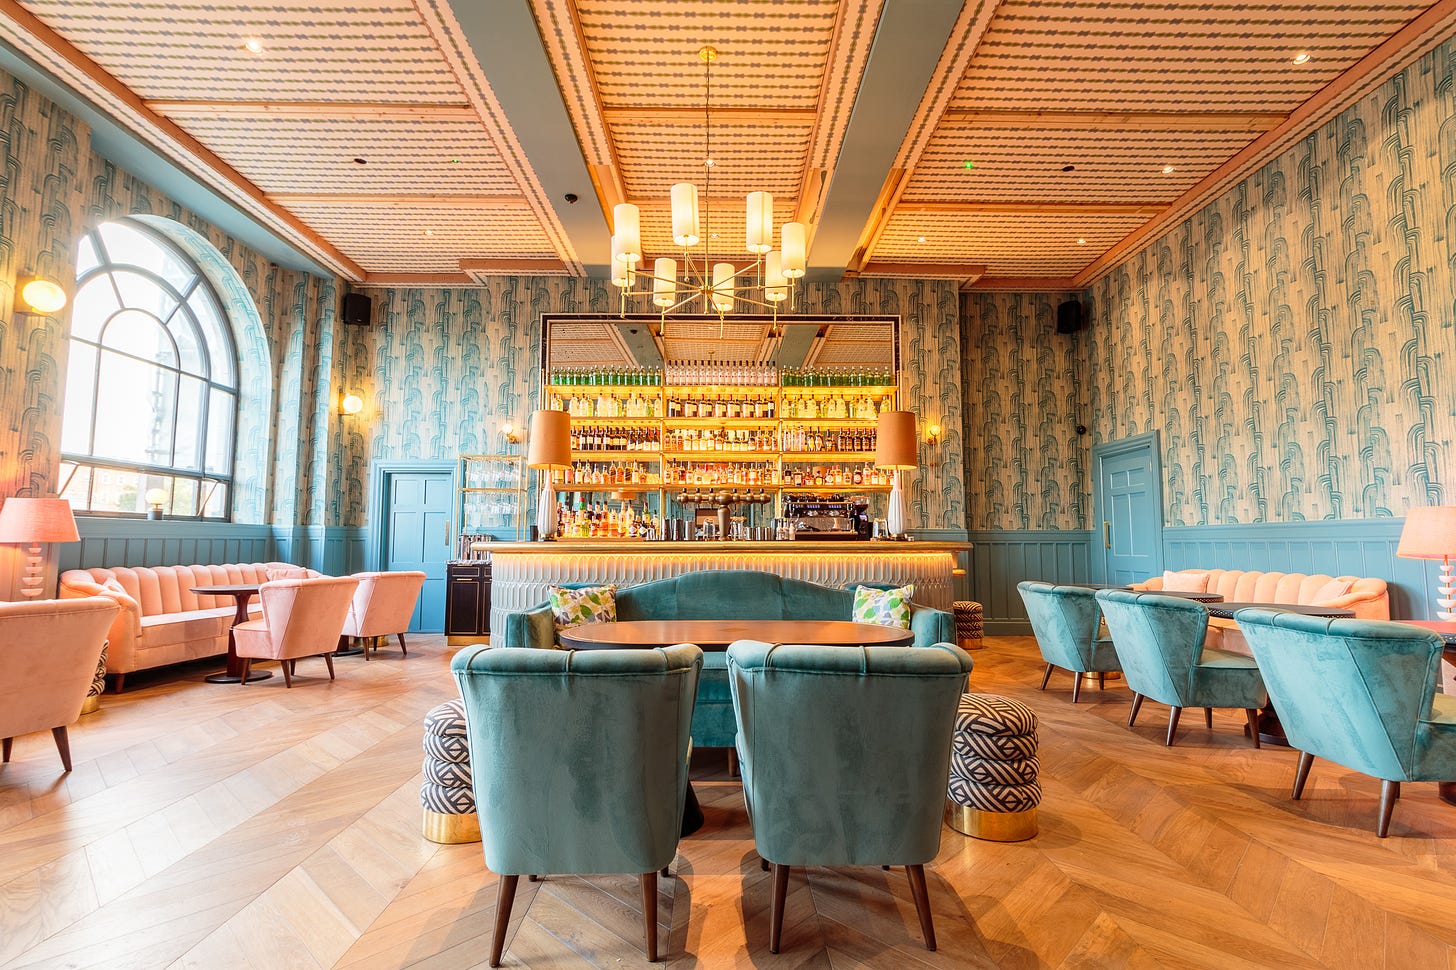 Spacious bar in hues of blue and pink, with decadent light fixtures and cosy couches and low tables